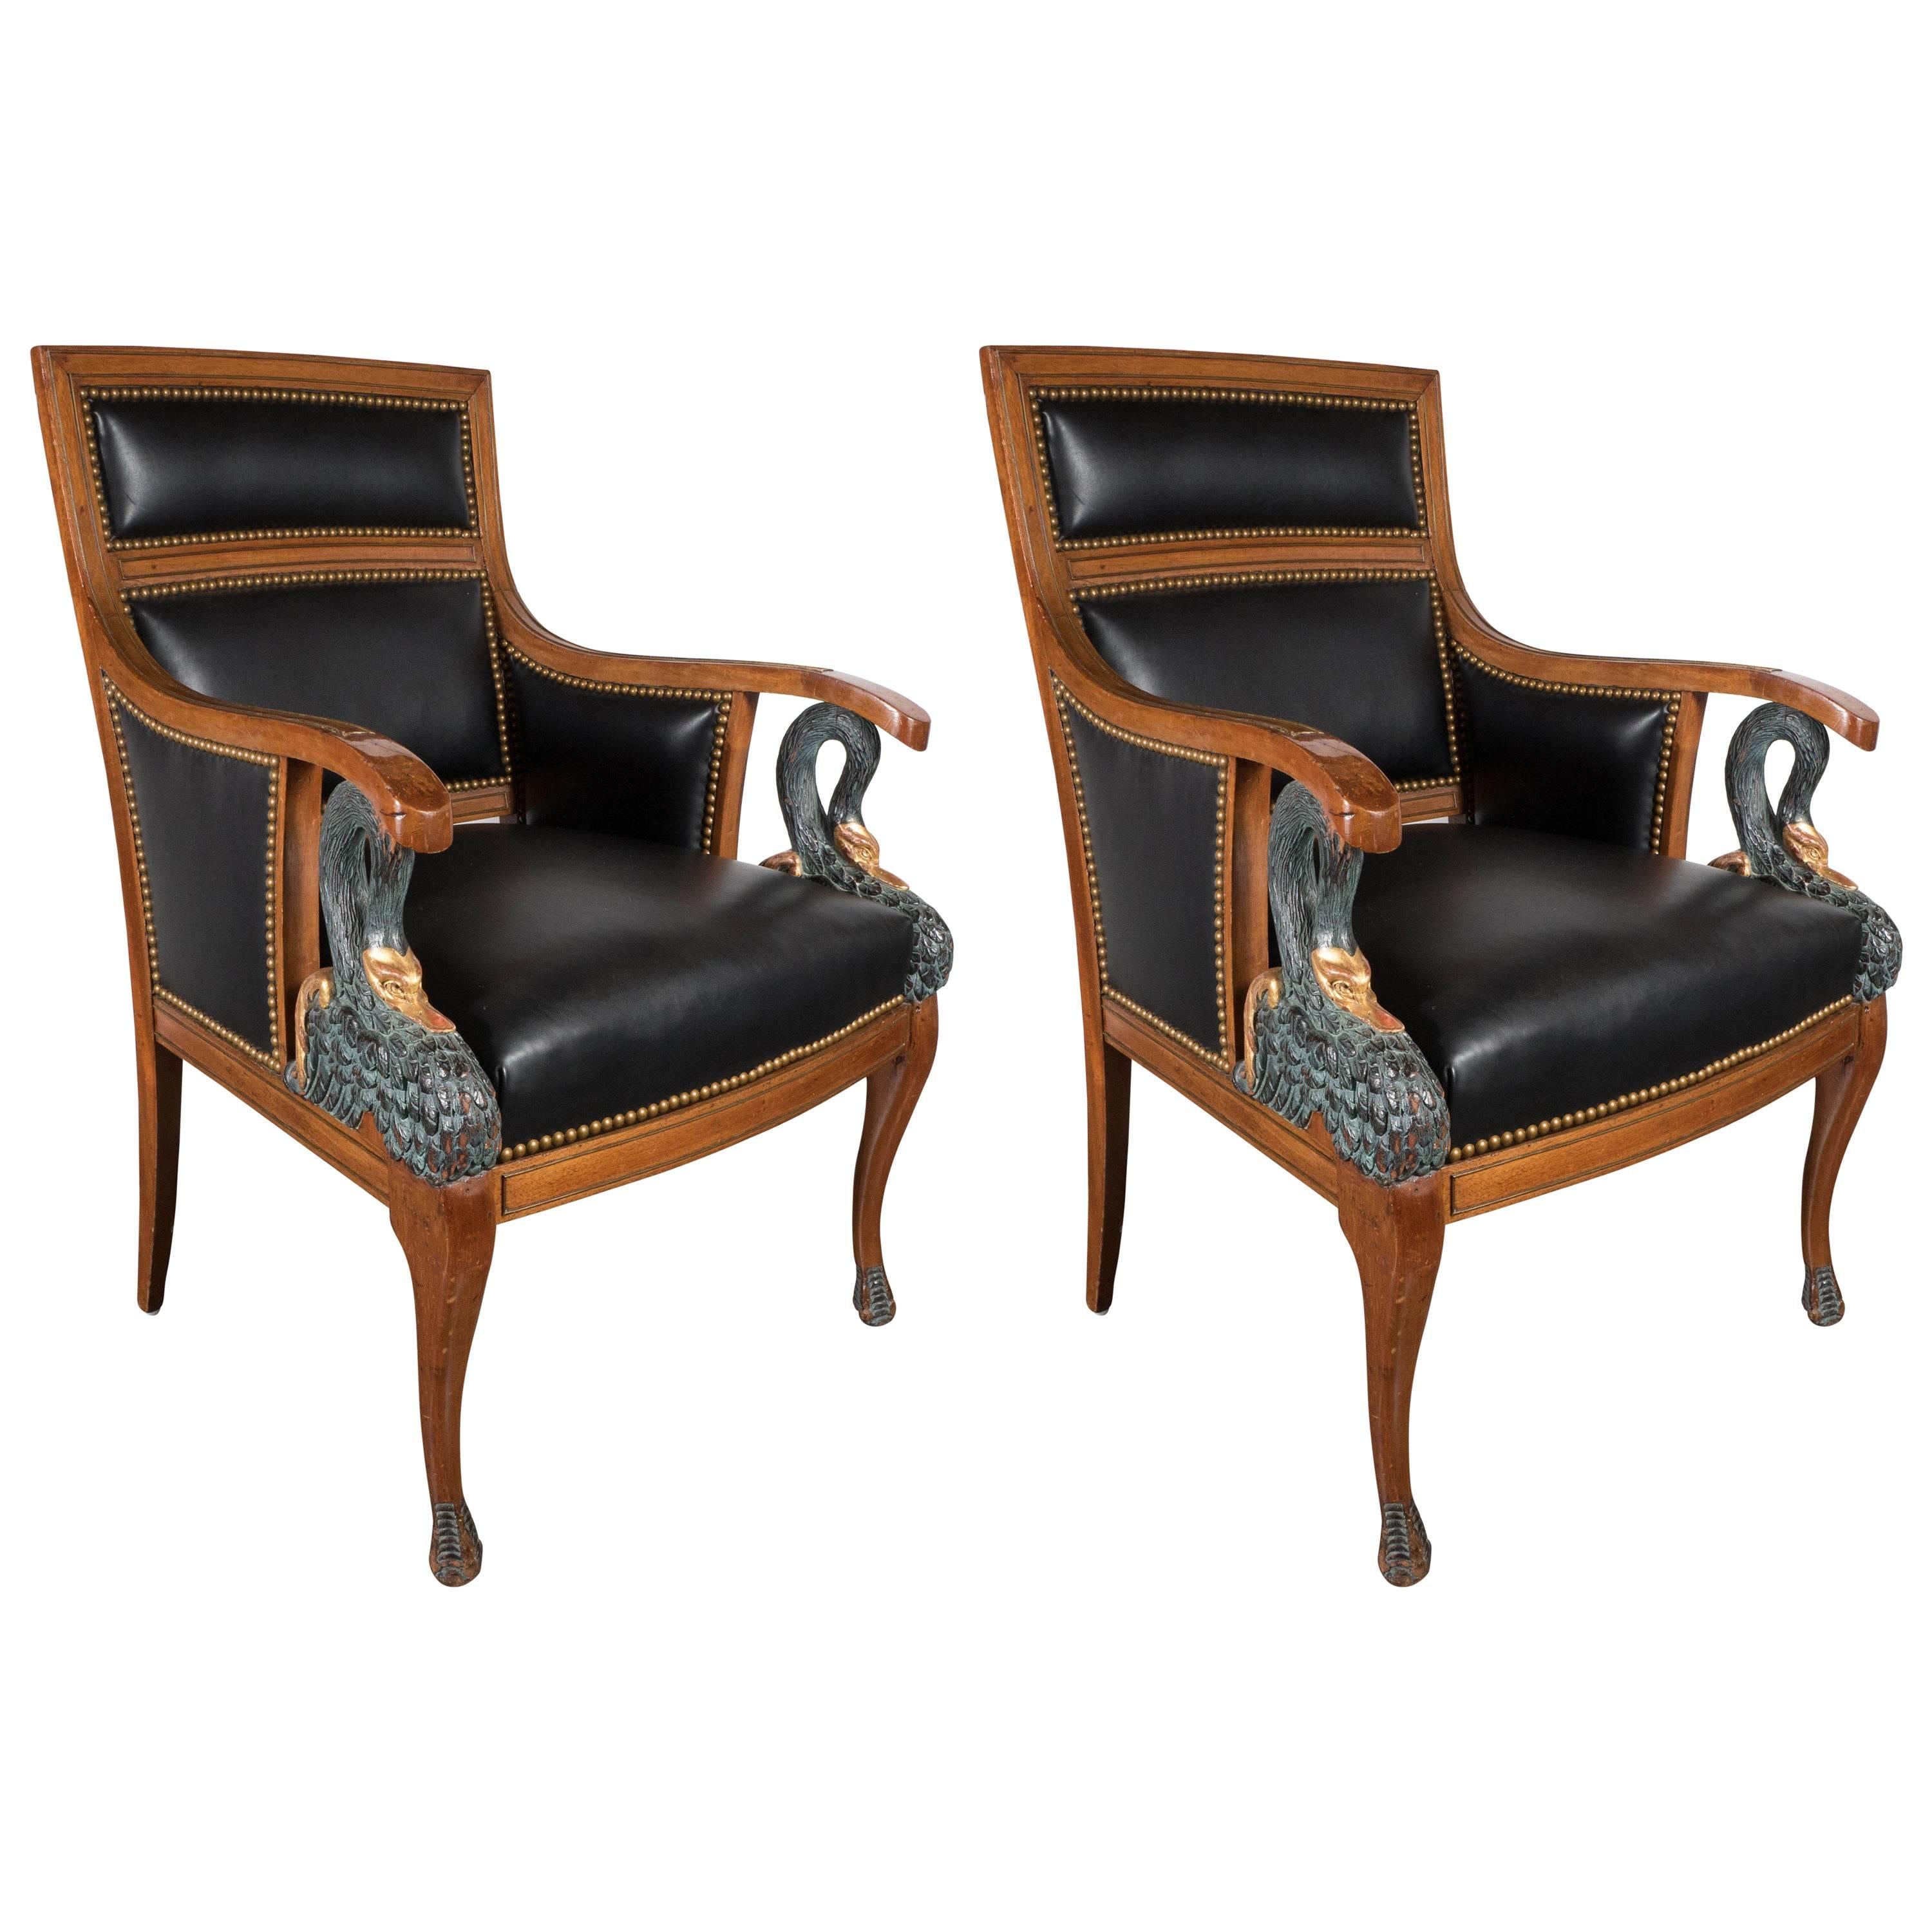 Pair of French Empire Bergeres Chairs with Swan Detailing and Gilt Accents